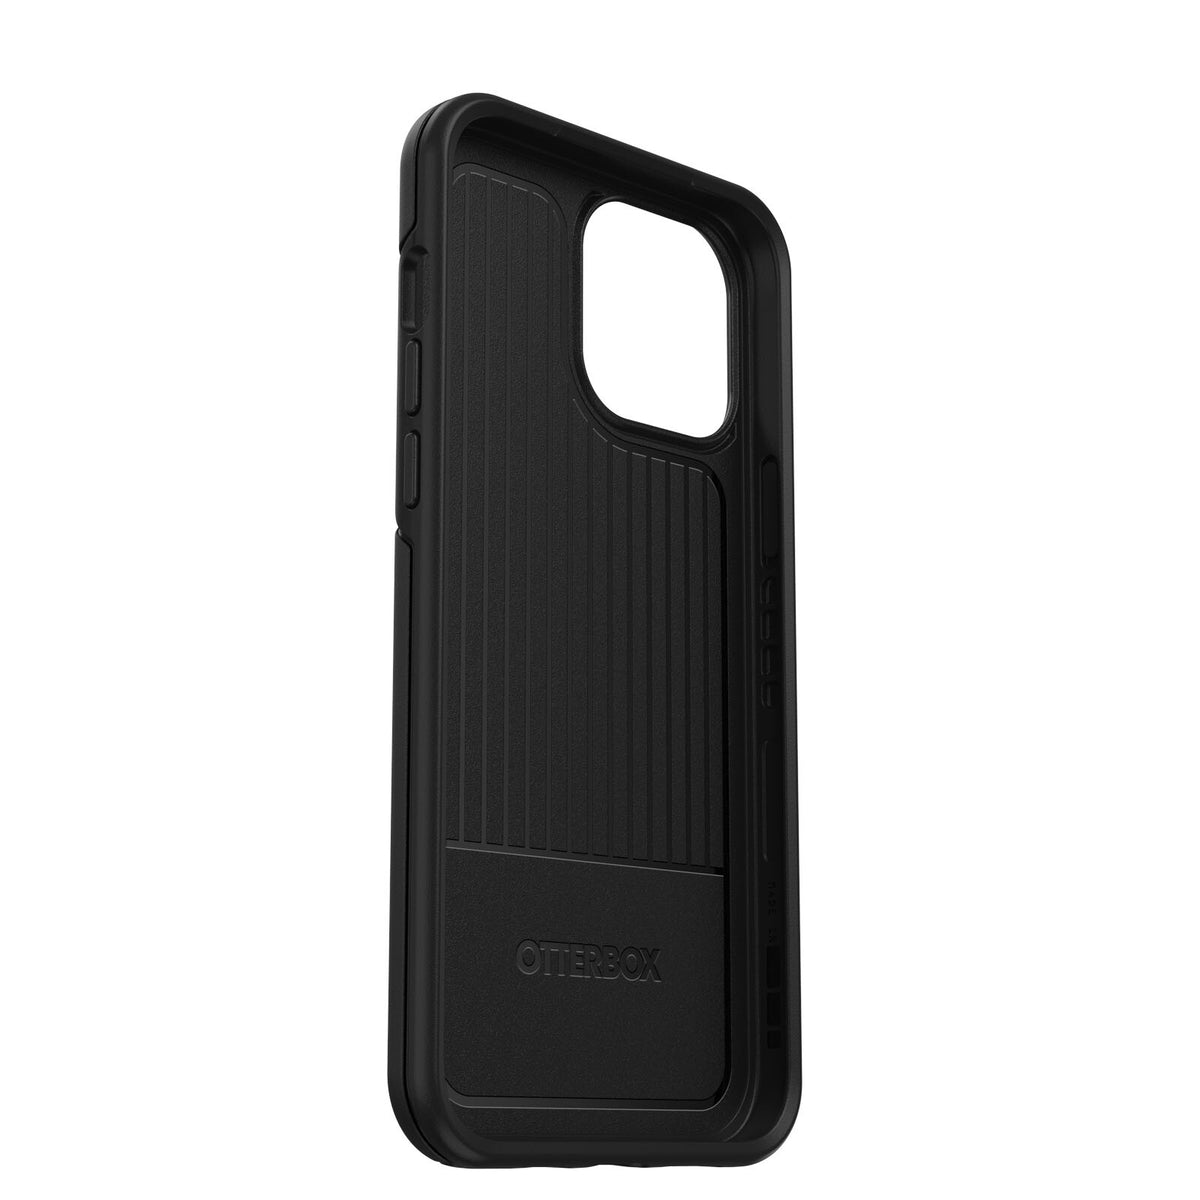 OtterBox Symmetry Series for iPhone 13 Pro Max / 12 Pro Max in Black - No Packaging